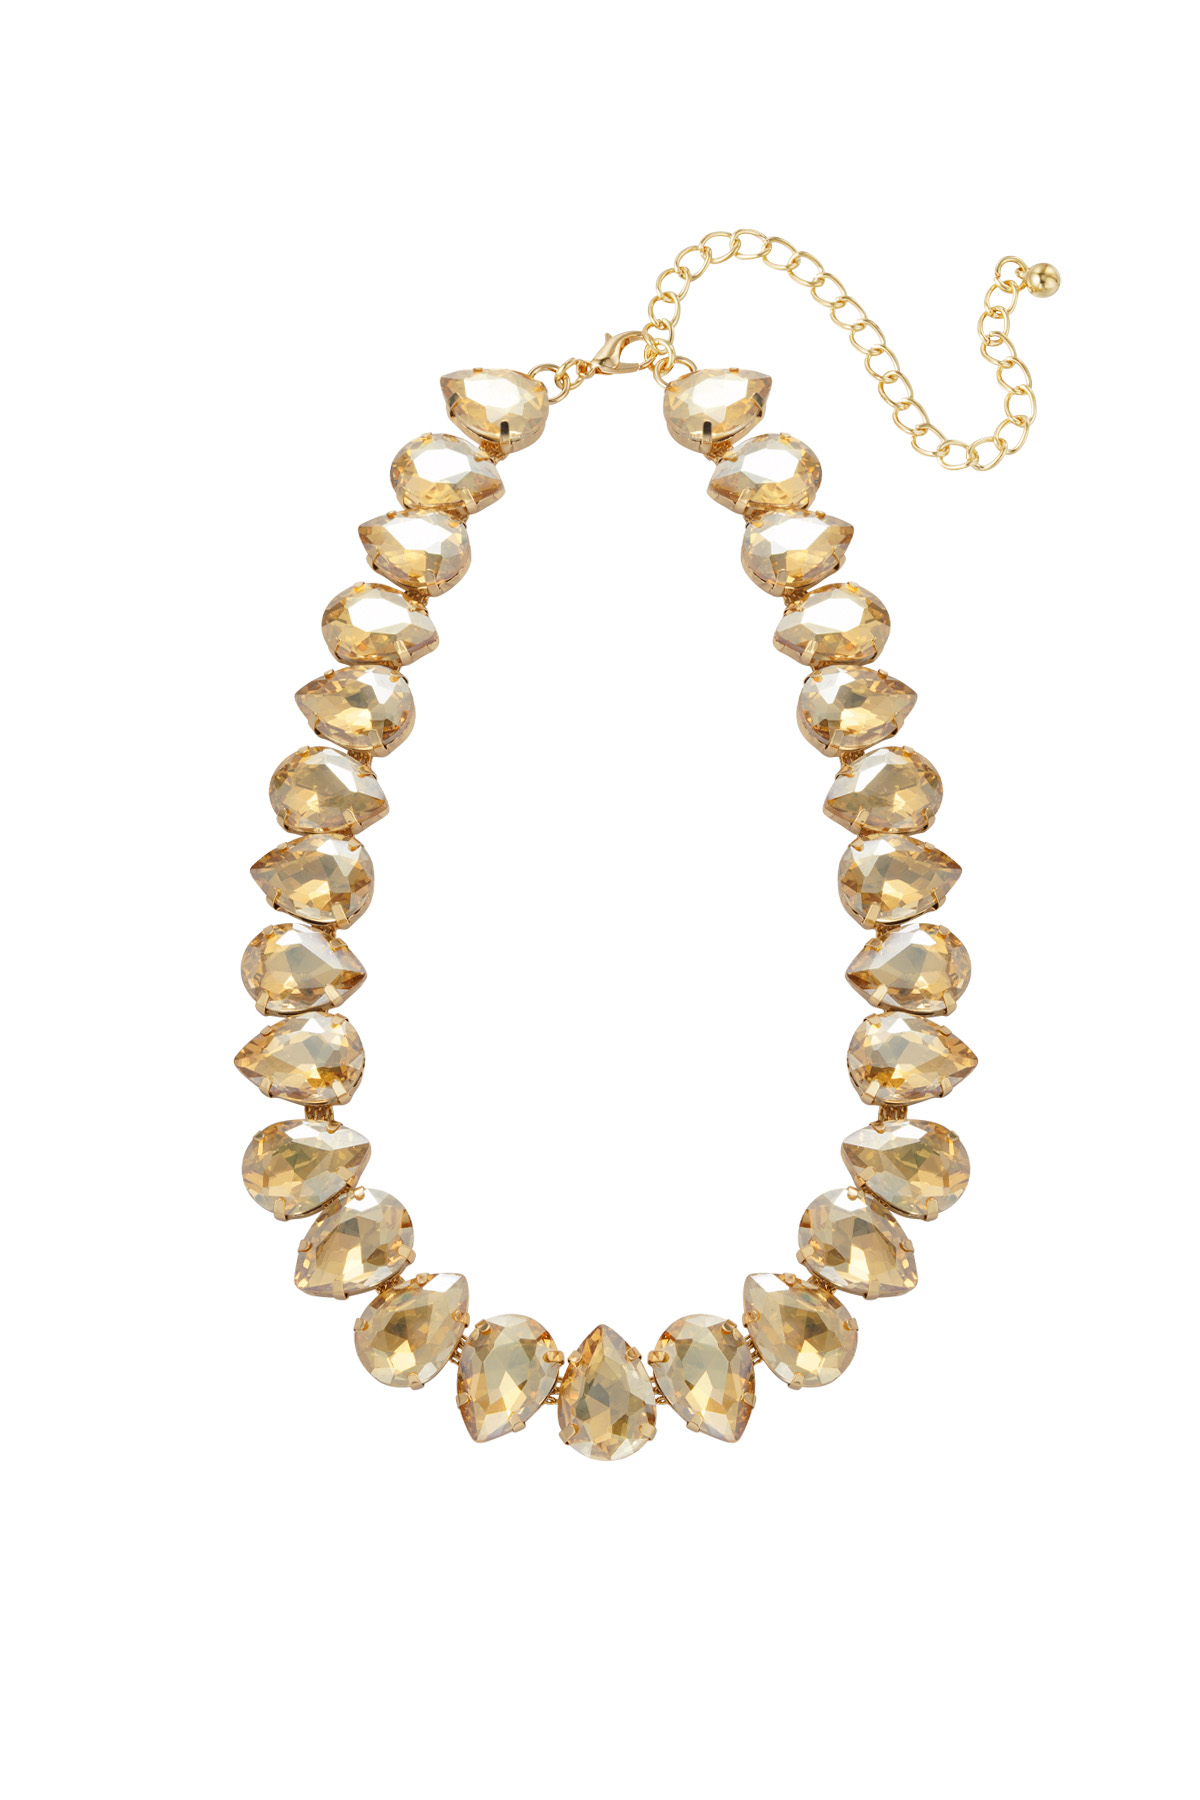 Necklace large beads - champagne